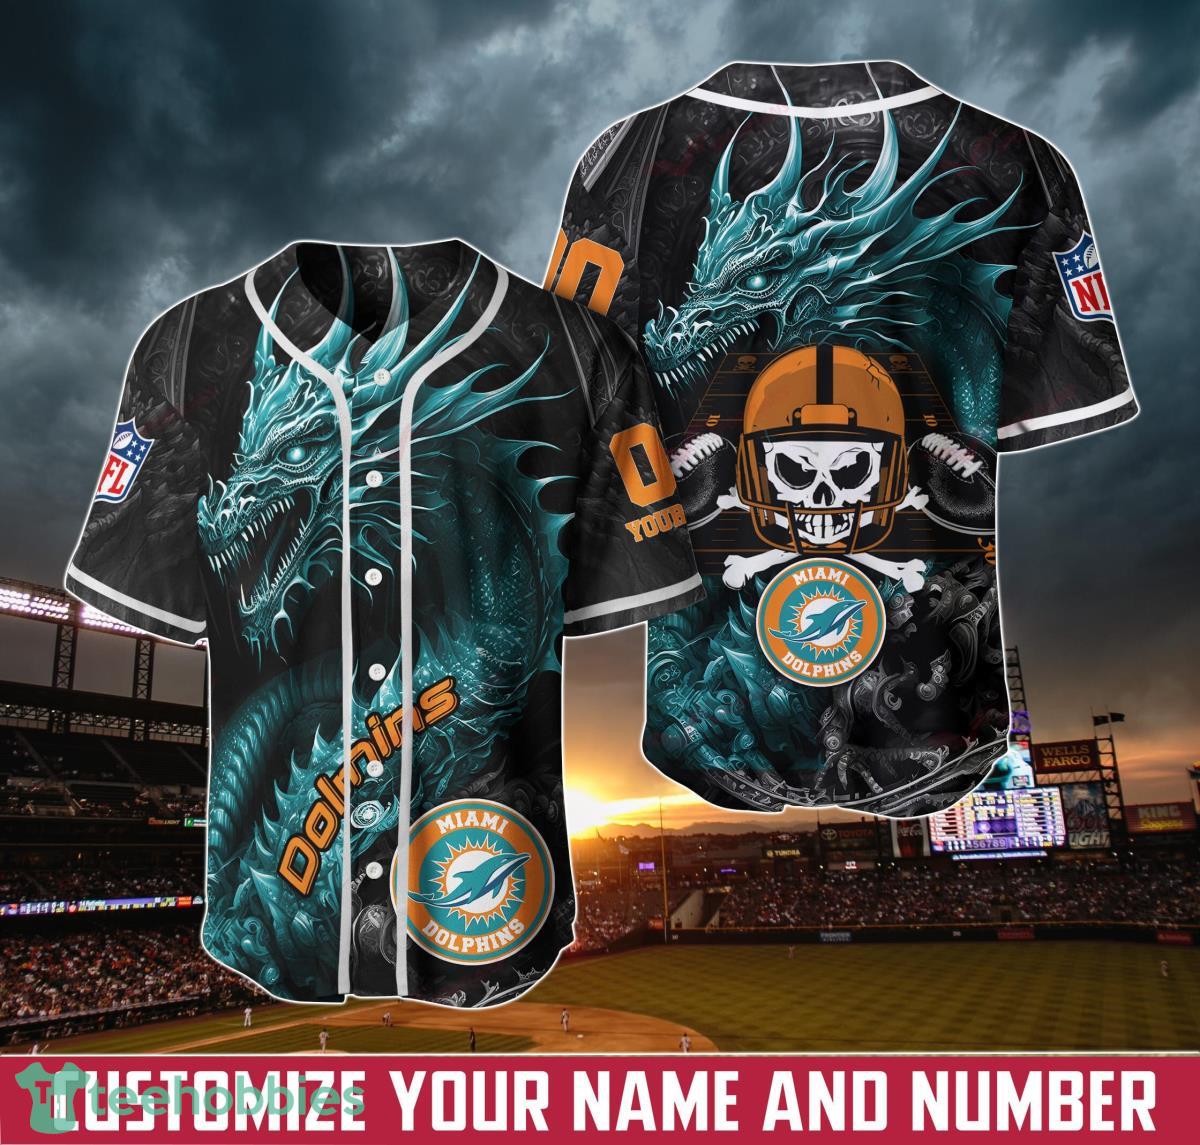 Miami Dolphins NFL Baseball Jersey Shirt Skull Custom Number And